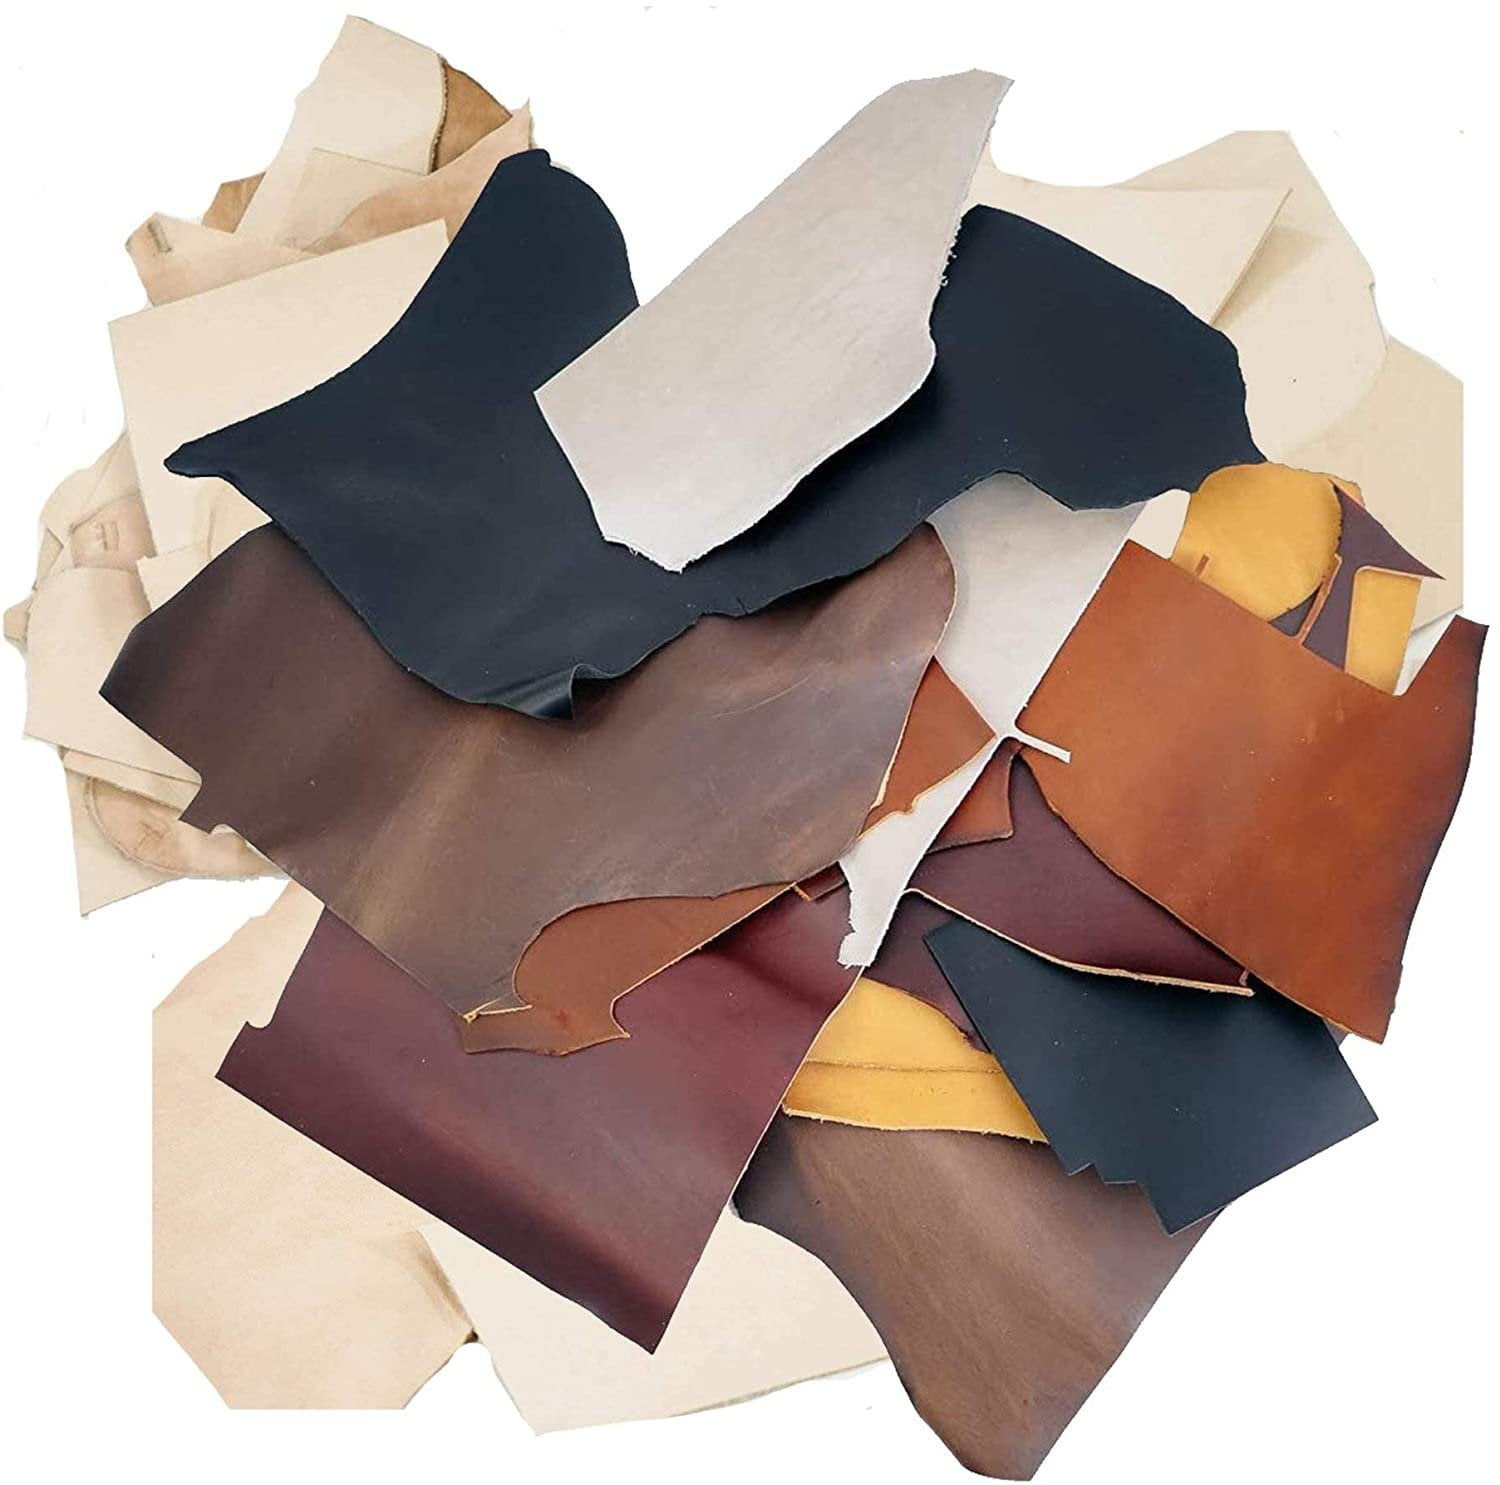 ELW Vegetable Tanned Leather ScrapsMixed Earth Tone 6-10 oz 2.4